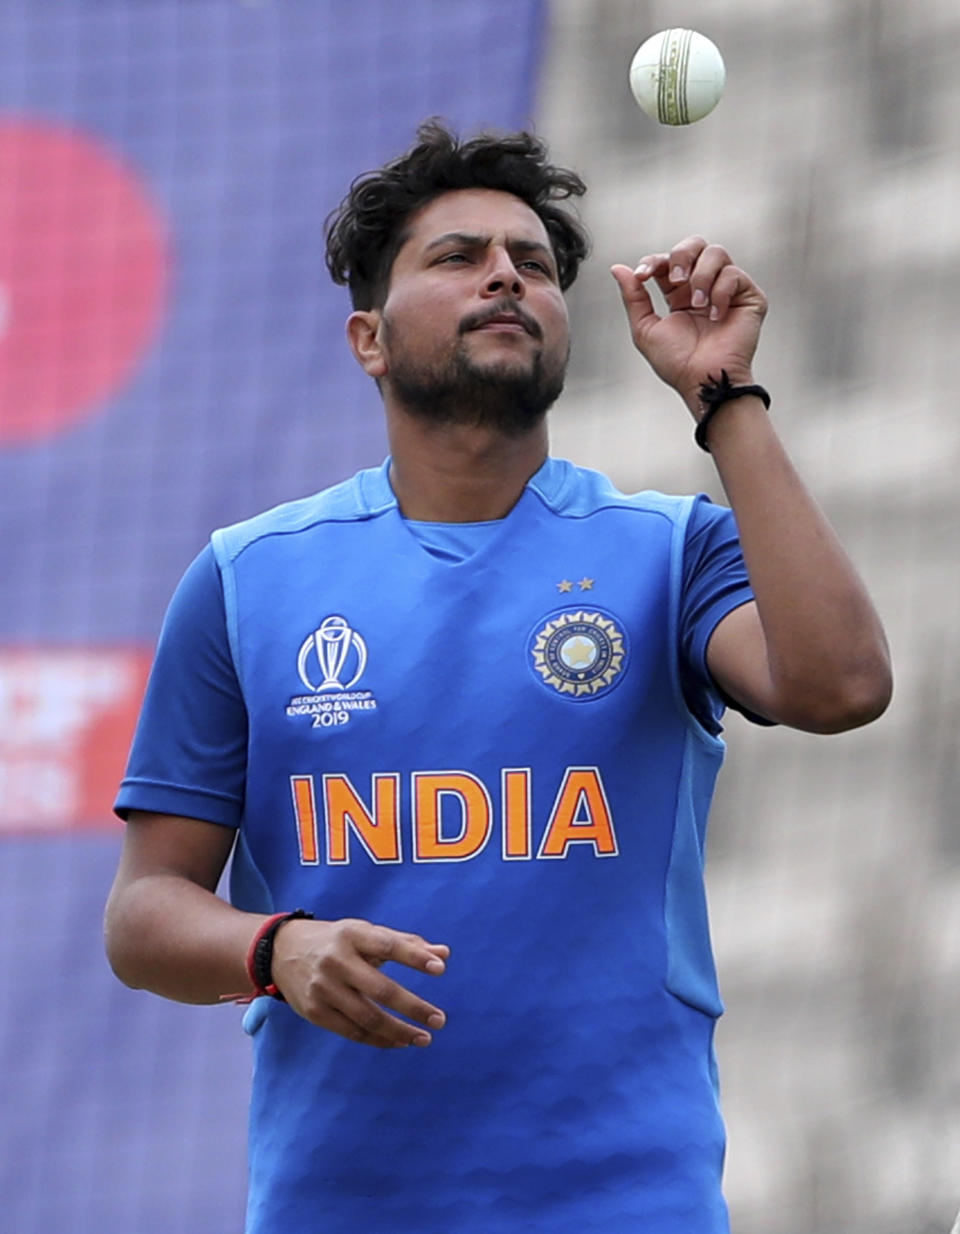 India's Kuldeep Yadav prepares to bowl in the nets during a training session ahead of their Cricket World Cup match against South Africa at Ageas Bowl in Southampton, England, Monday, June 3, 2019. (AP Photo/Aijaz Rahi)